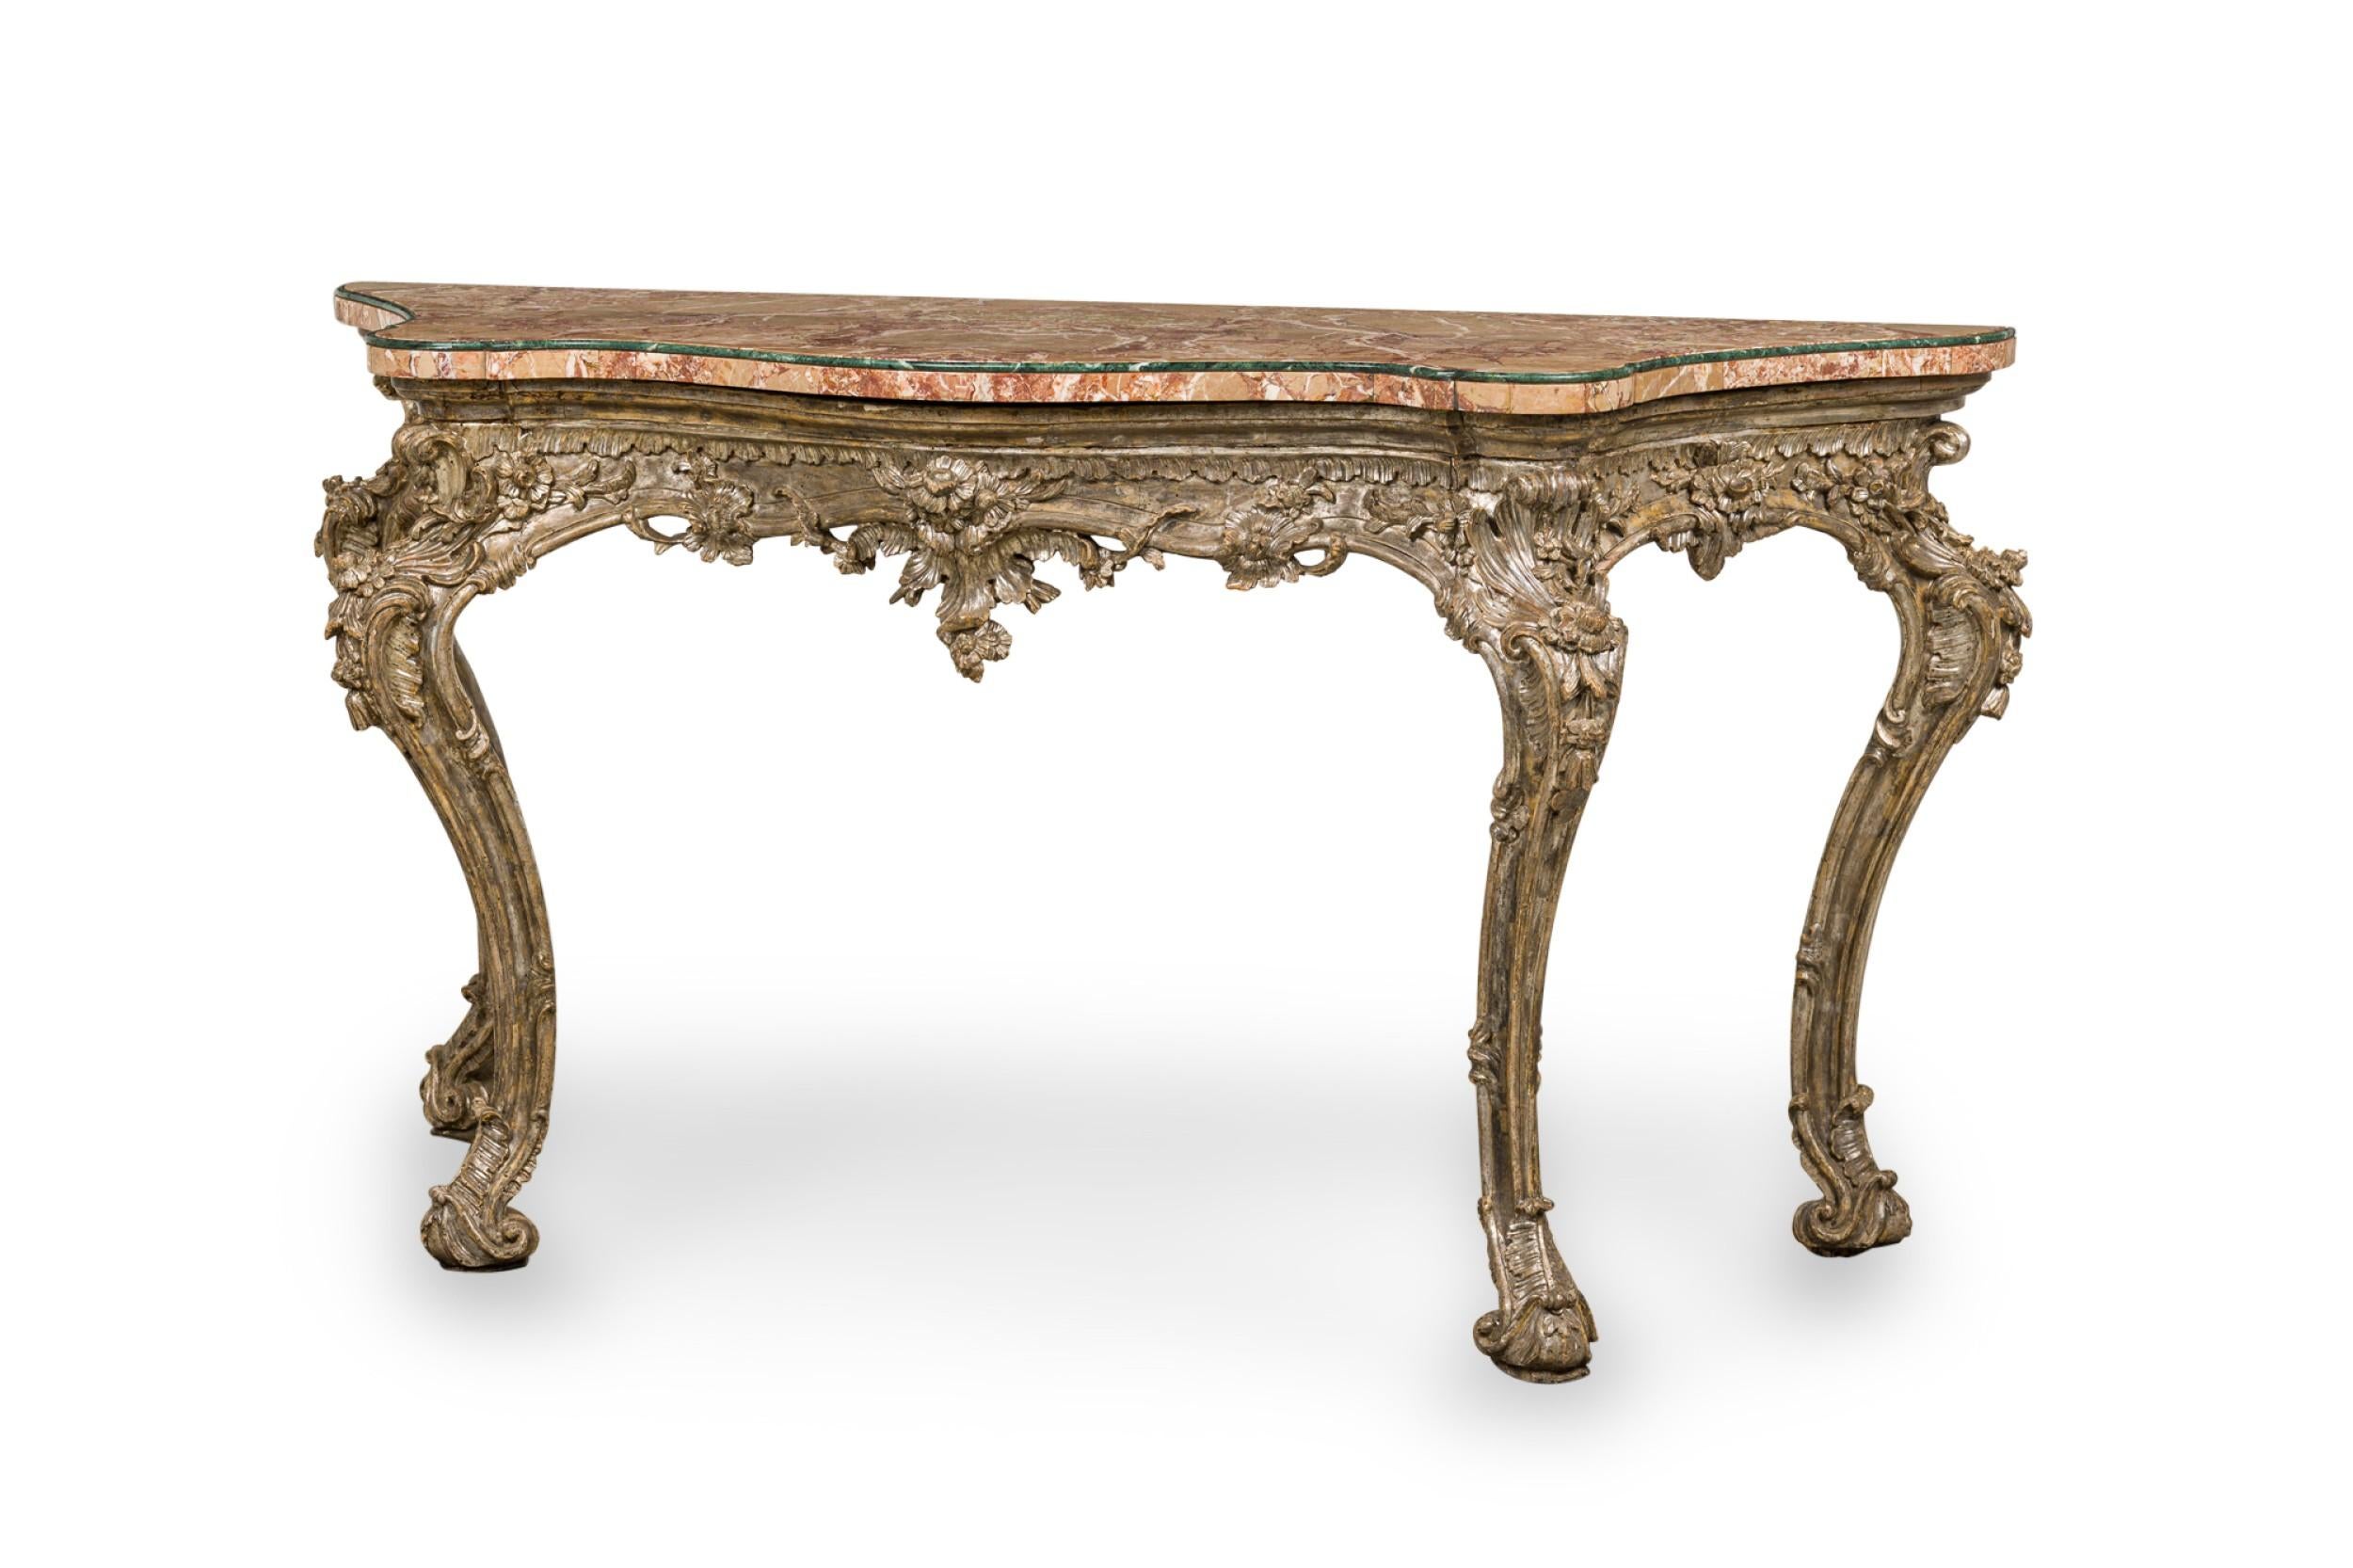 Italian Rococo console table with an ornately carved foliate design silver gilt frame supporting a shaped blush marble top with rounded green marble trim.
 

 Minor losses to finish and decorations on base.
